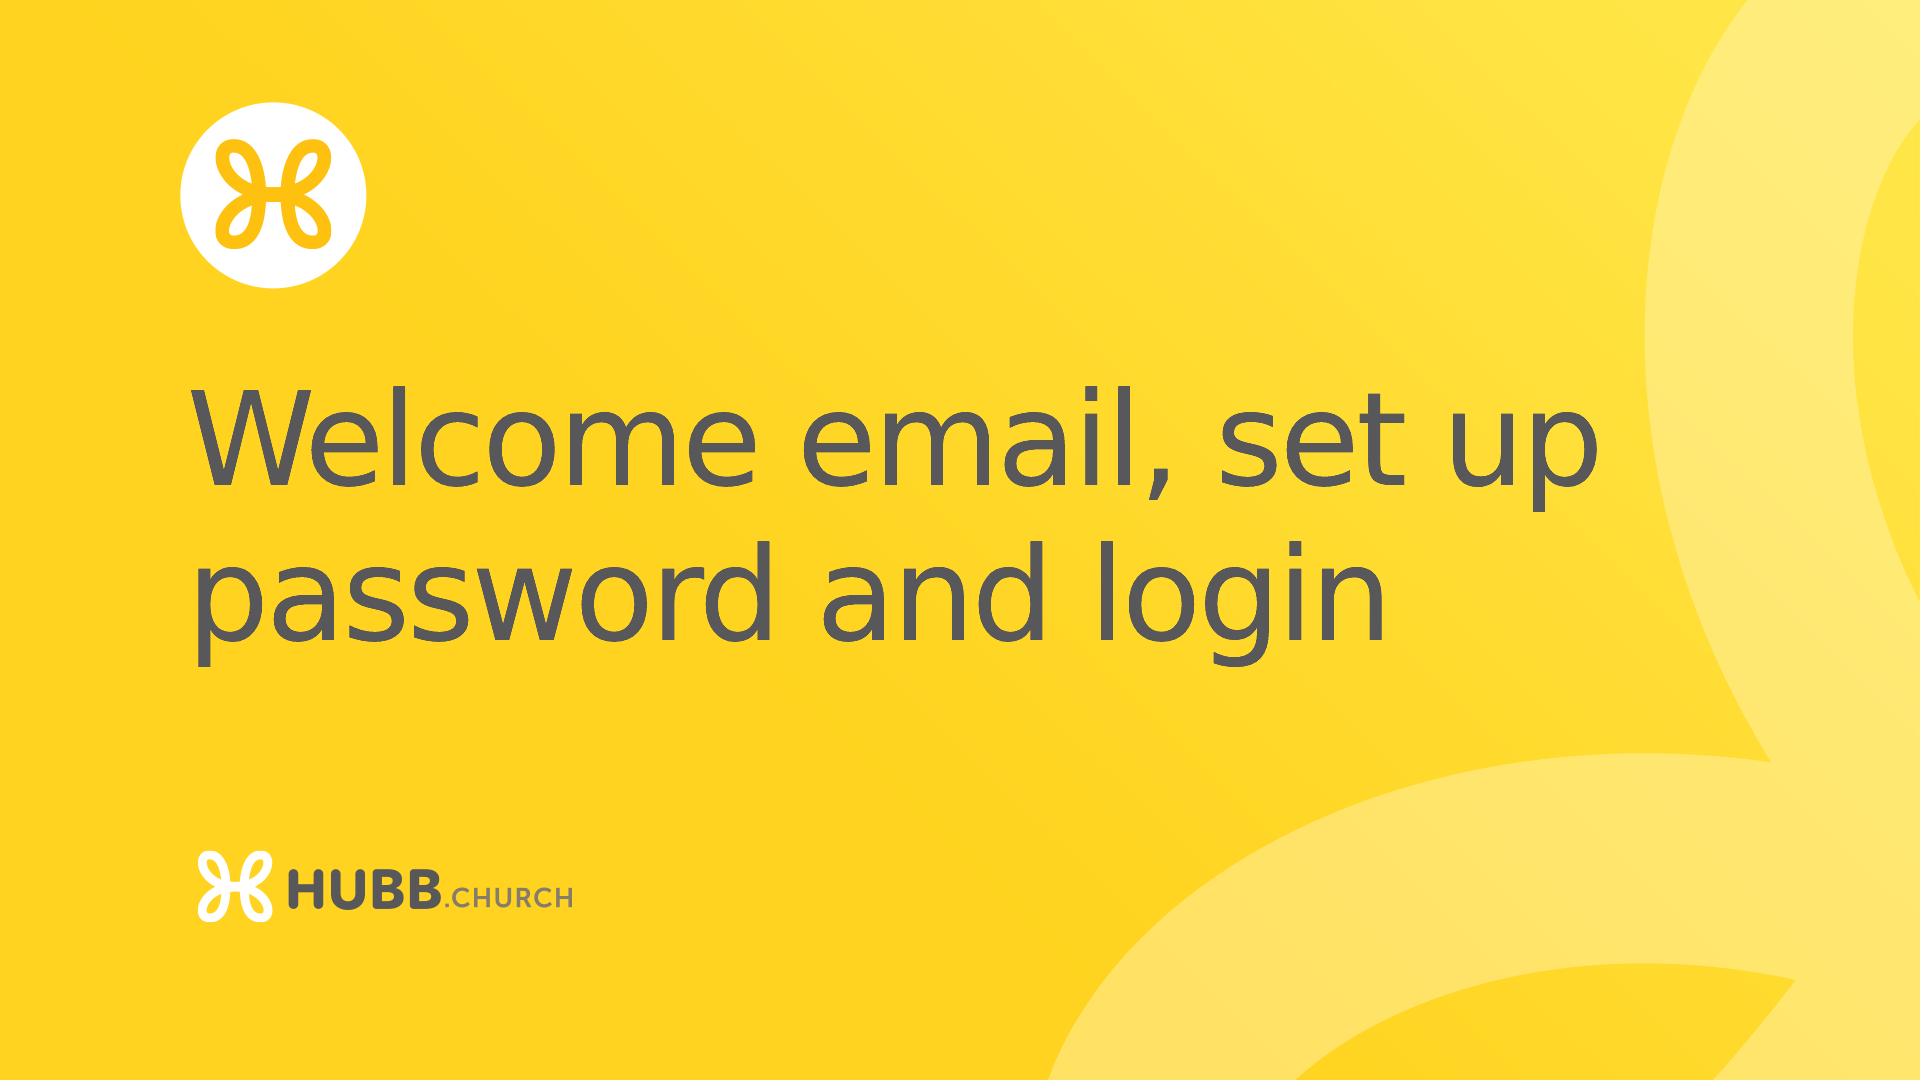 Welcome email, setup password and log in